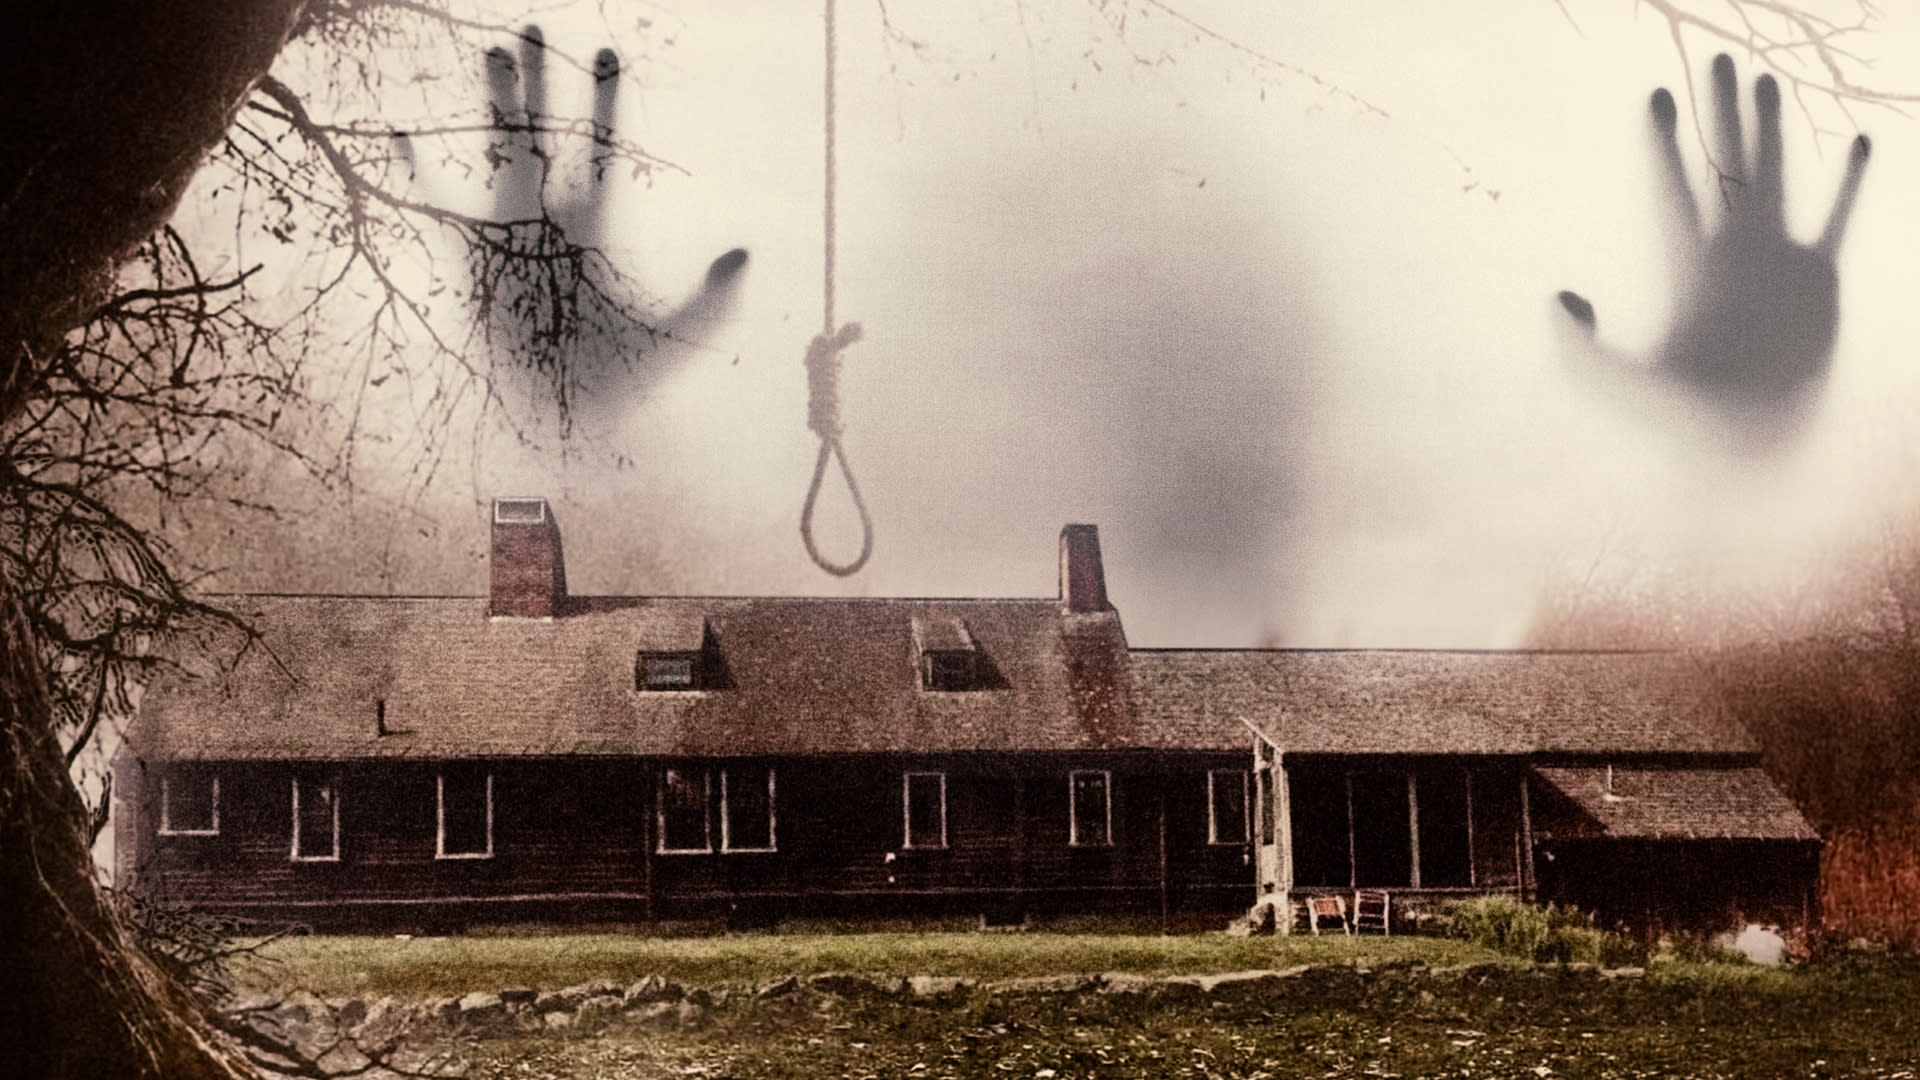 There’s a ‘Conjuring’ house live-streaming event coming up. Here’s what you won’t see